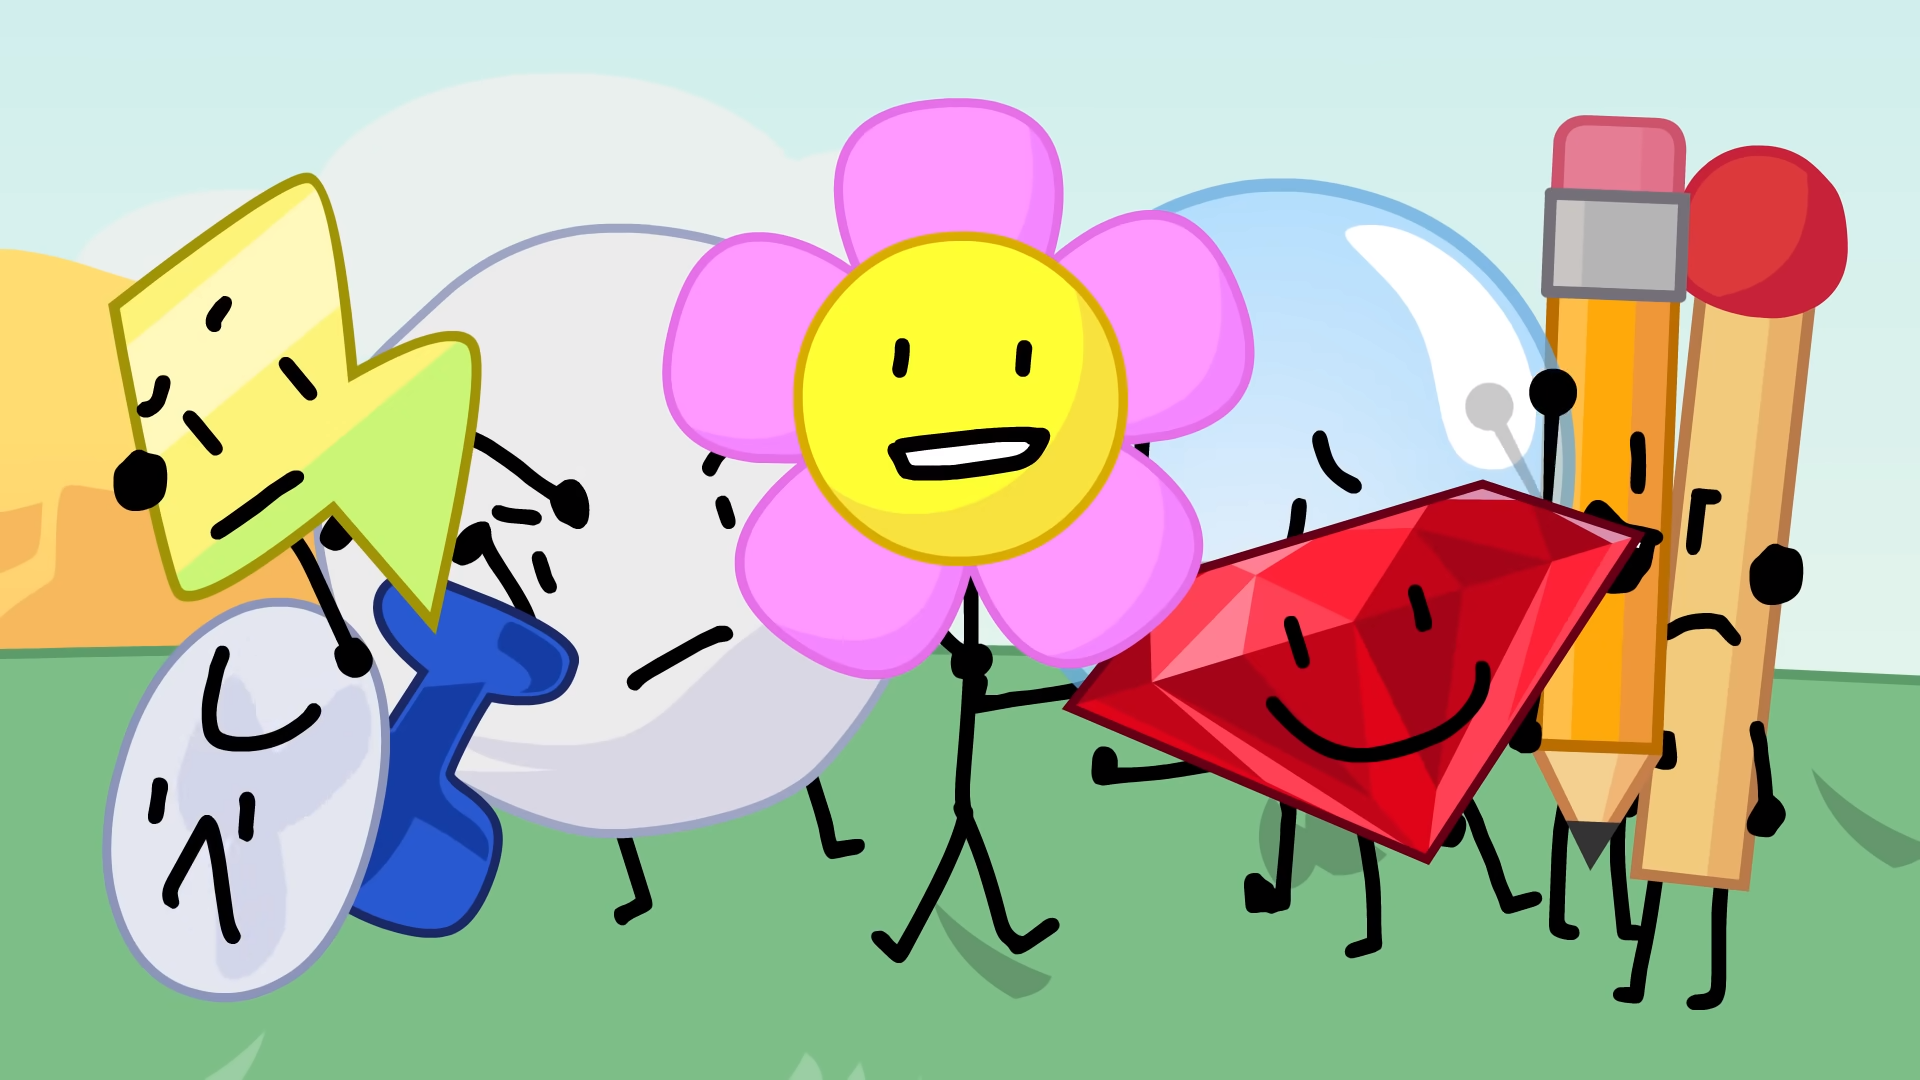 BFB Flower Wallpapers - Wallpaper Cave.